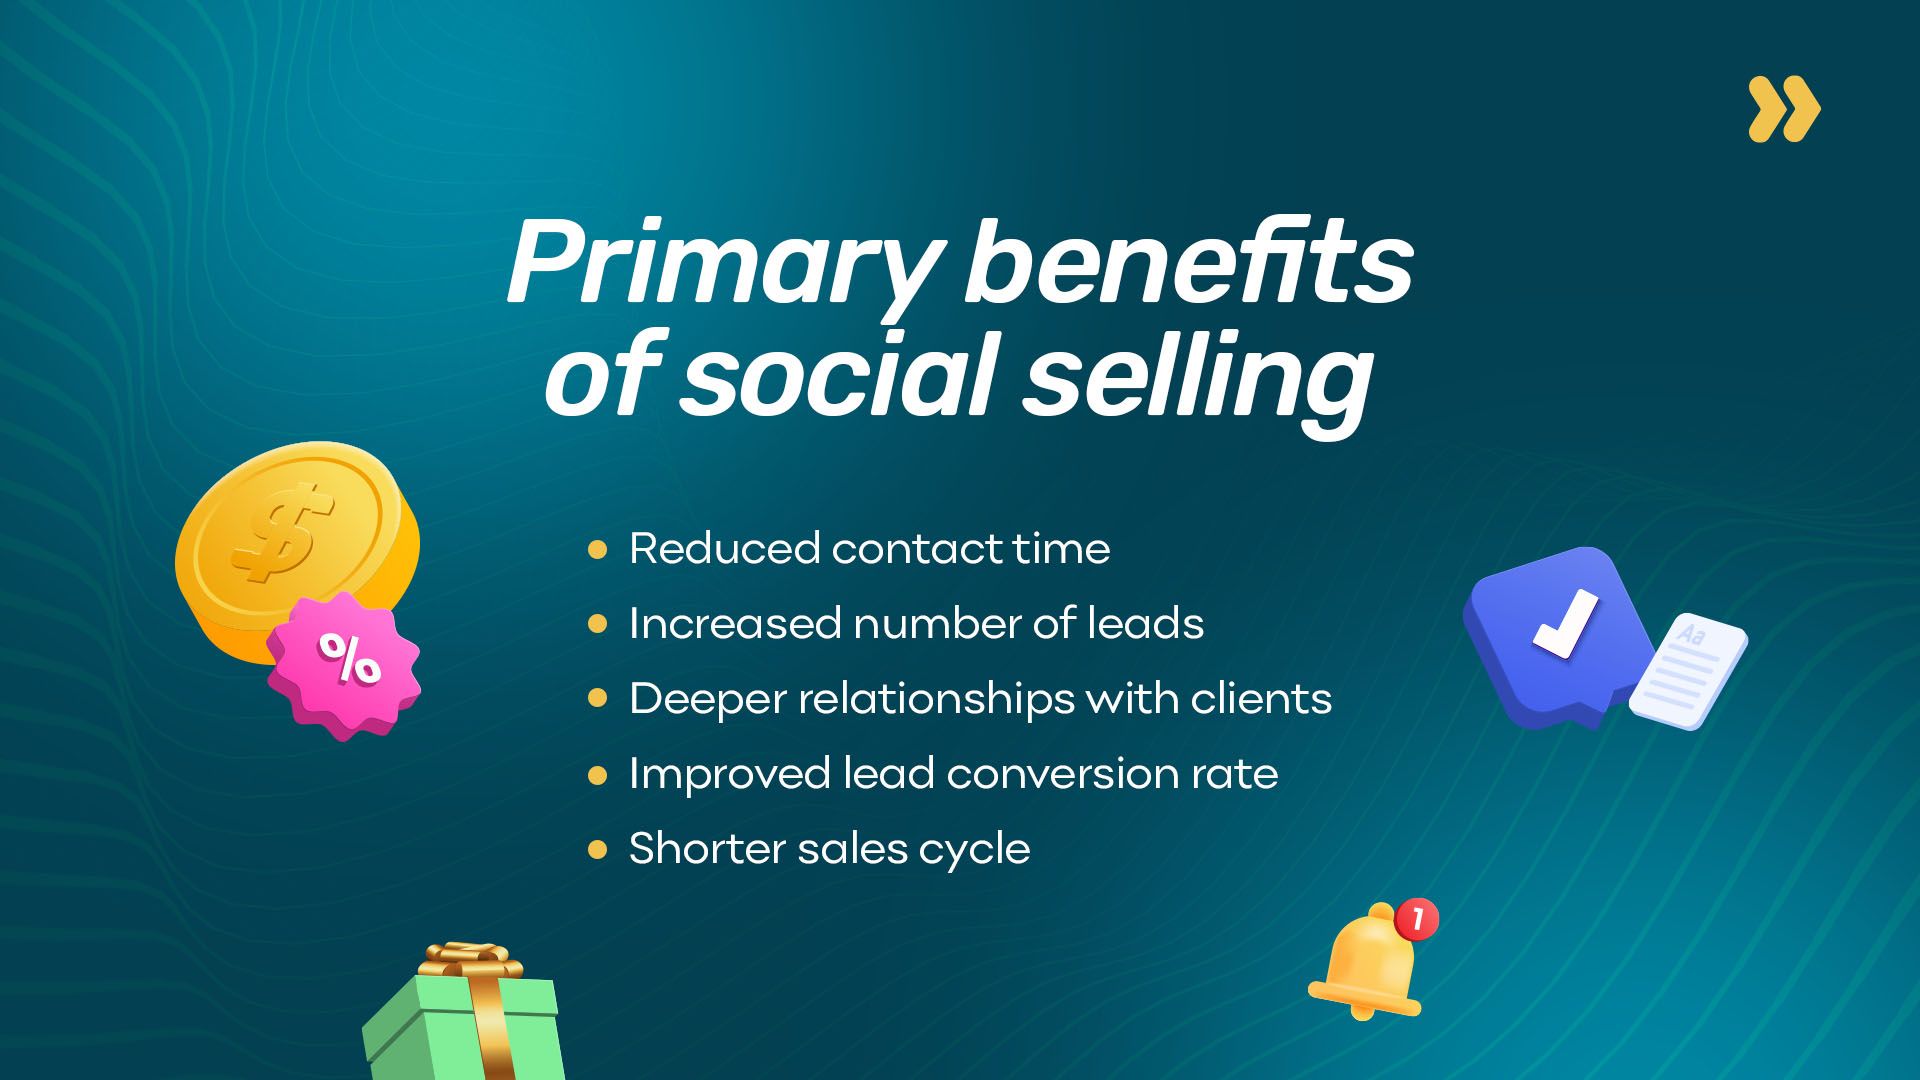 What are the benefits of social selling?